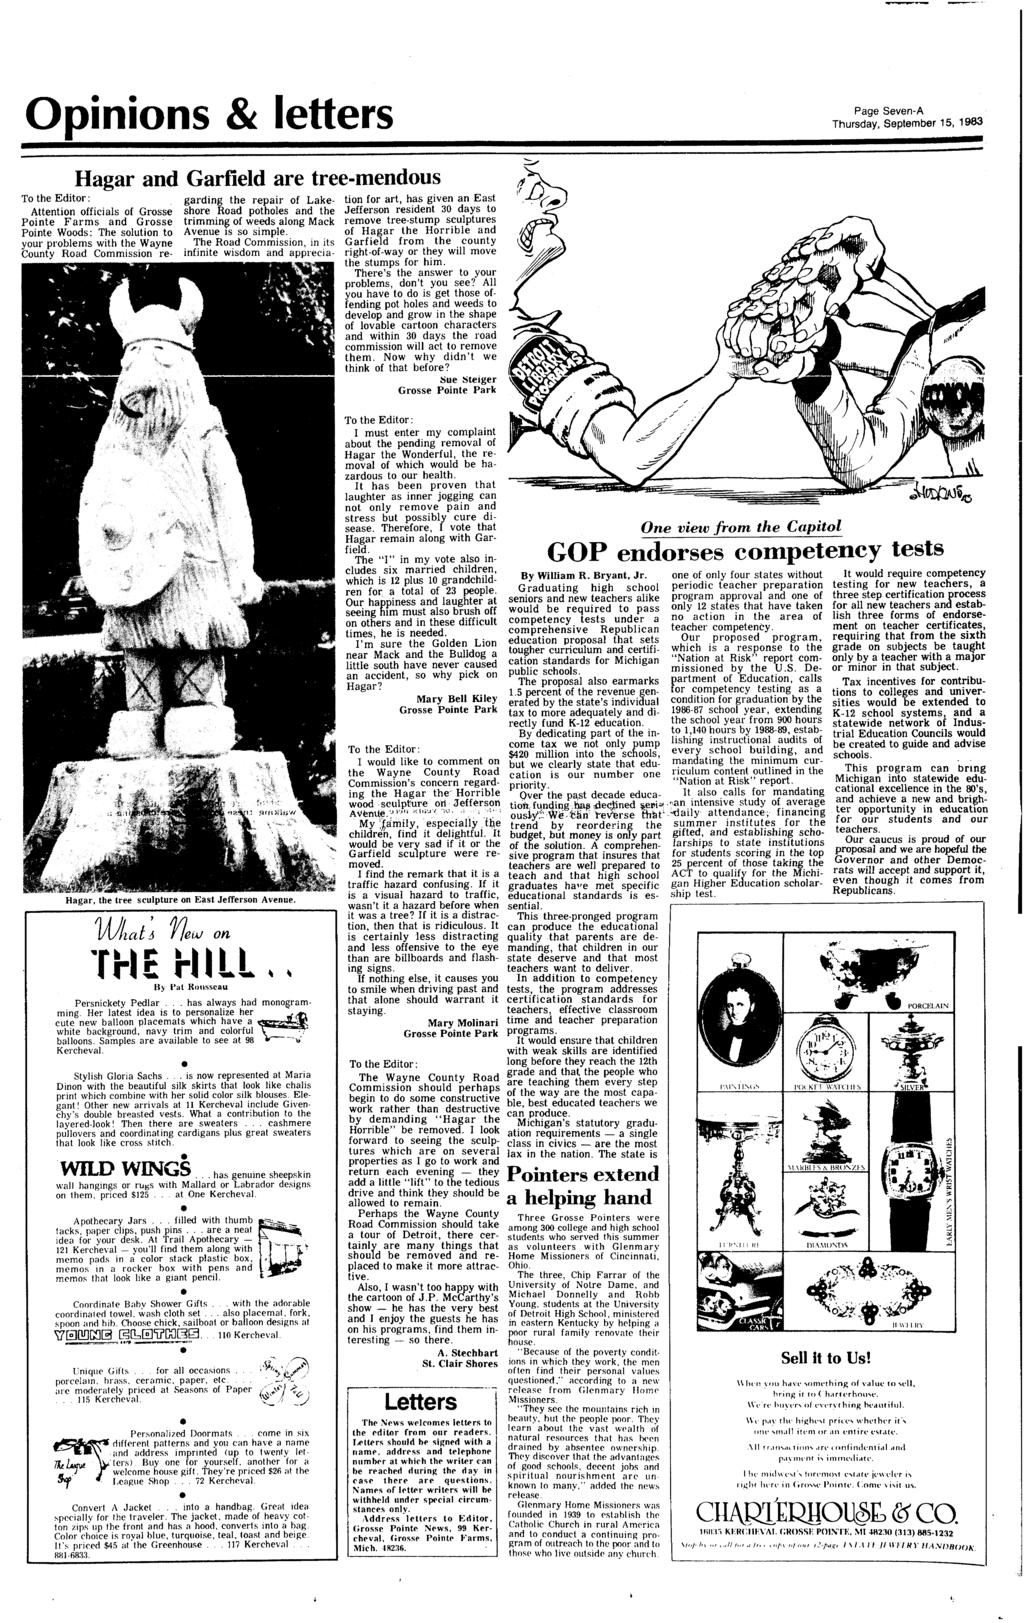 Opinions & letters Page Seven-A Thursday, September 15, 1983 Hagar and Garfield are tree-mendous To the Editor: Attenton officials of Grosse Pointe Farms and Grosse Pomte Woods: The solution to your